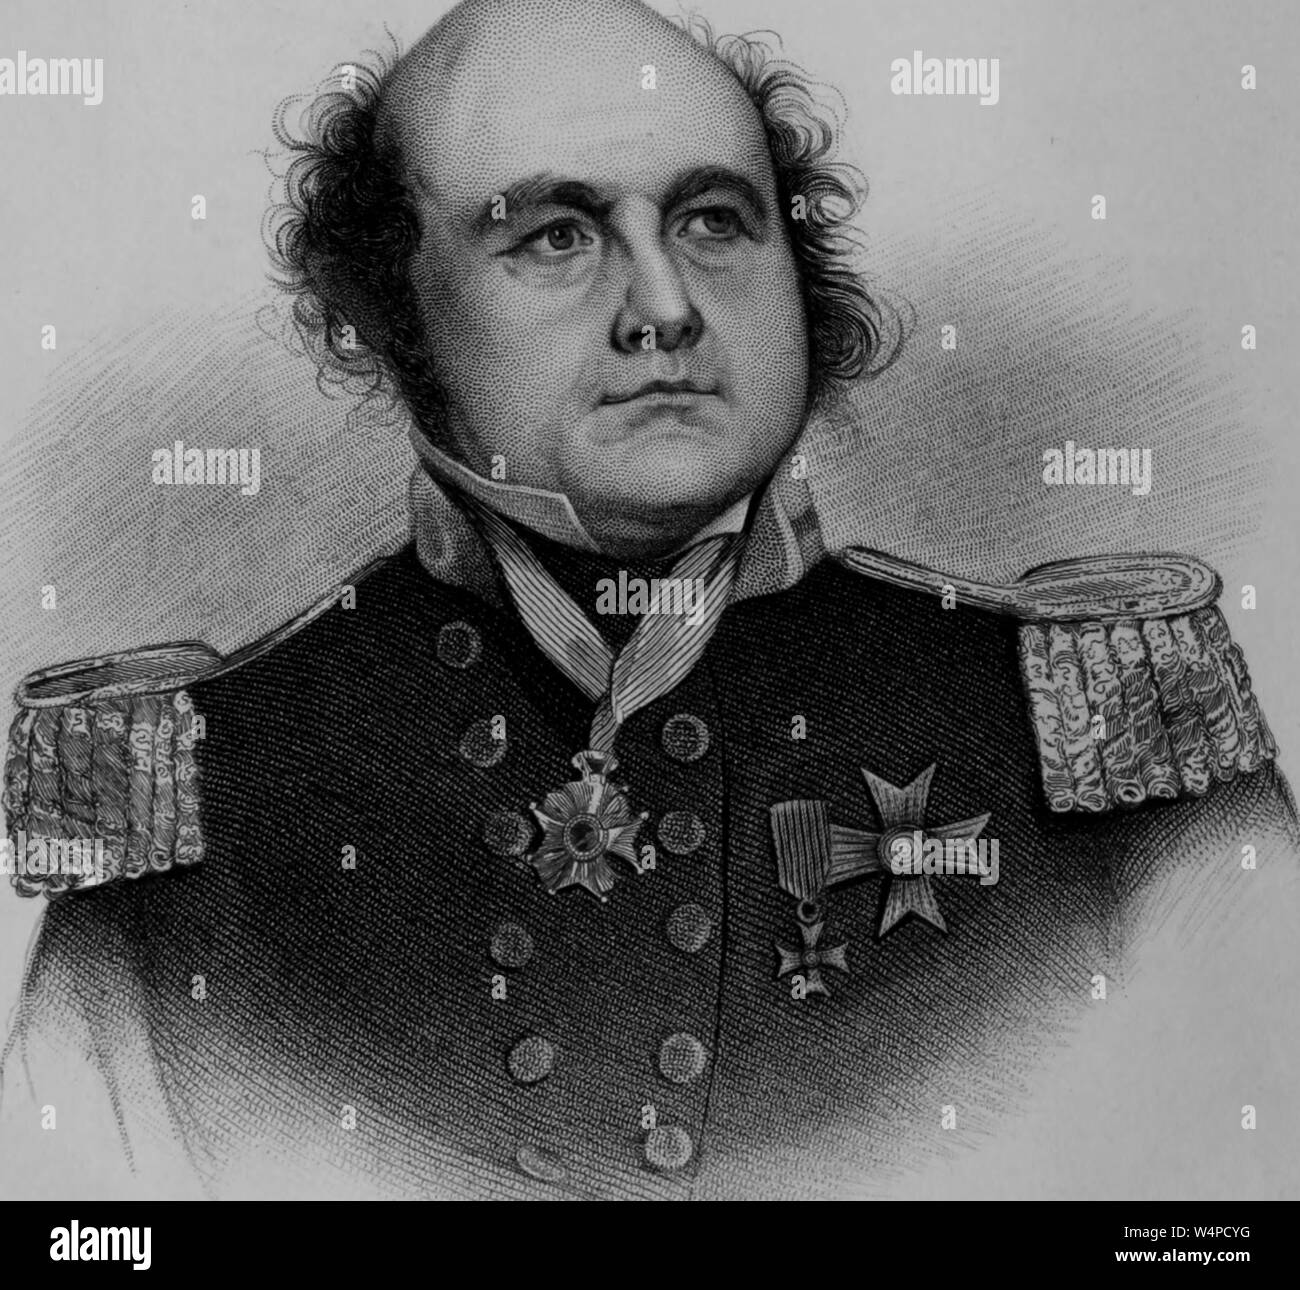 Engraved portrait of Rear Admiral Sir John Franklin, the British Royal Navy officer, and explorer of the Arctic, from the book 'The frozen zone and its explorers' by Alexander Hyde and Abraham Chittenden Baldwin, 1874. Courtesy Internet Archive. () Stock Photo